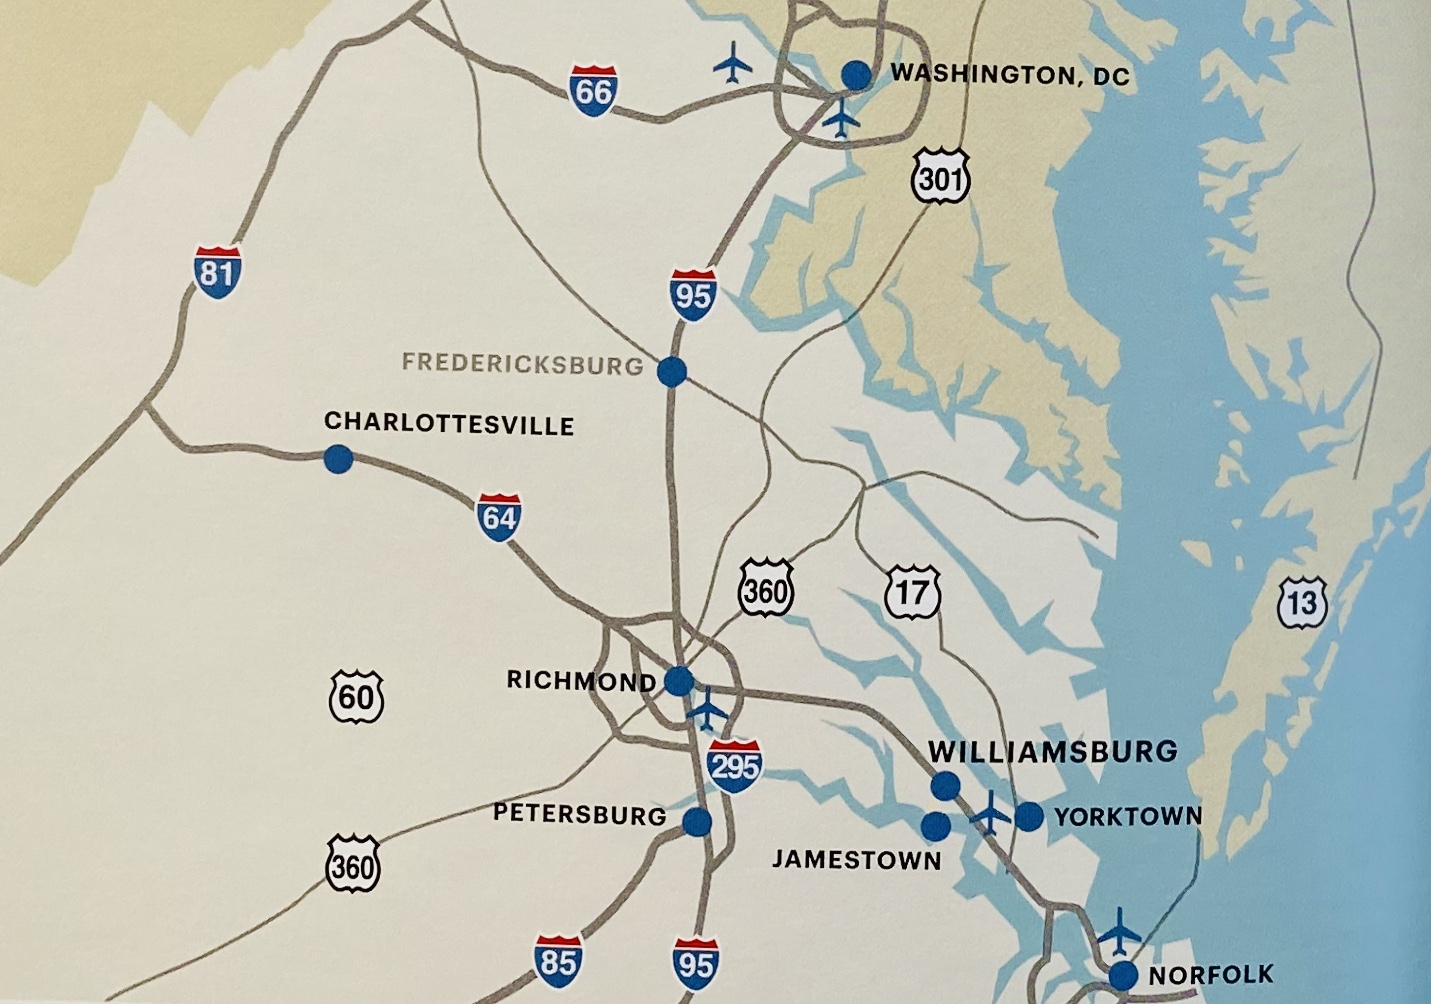 A map from The Guide to Colonial Williamsburg shows the proximity between Washington DC and Williamsburg, VA.